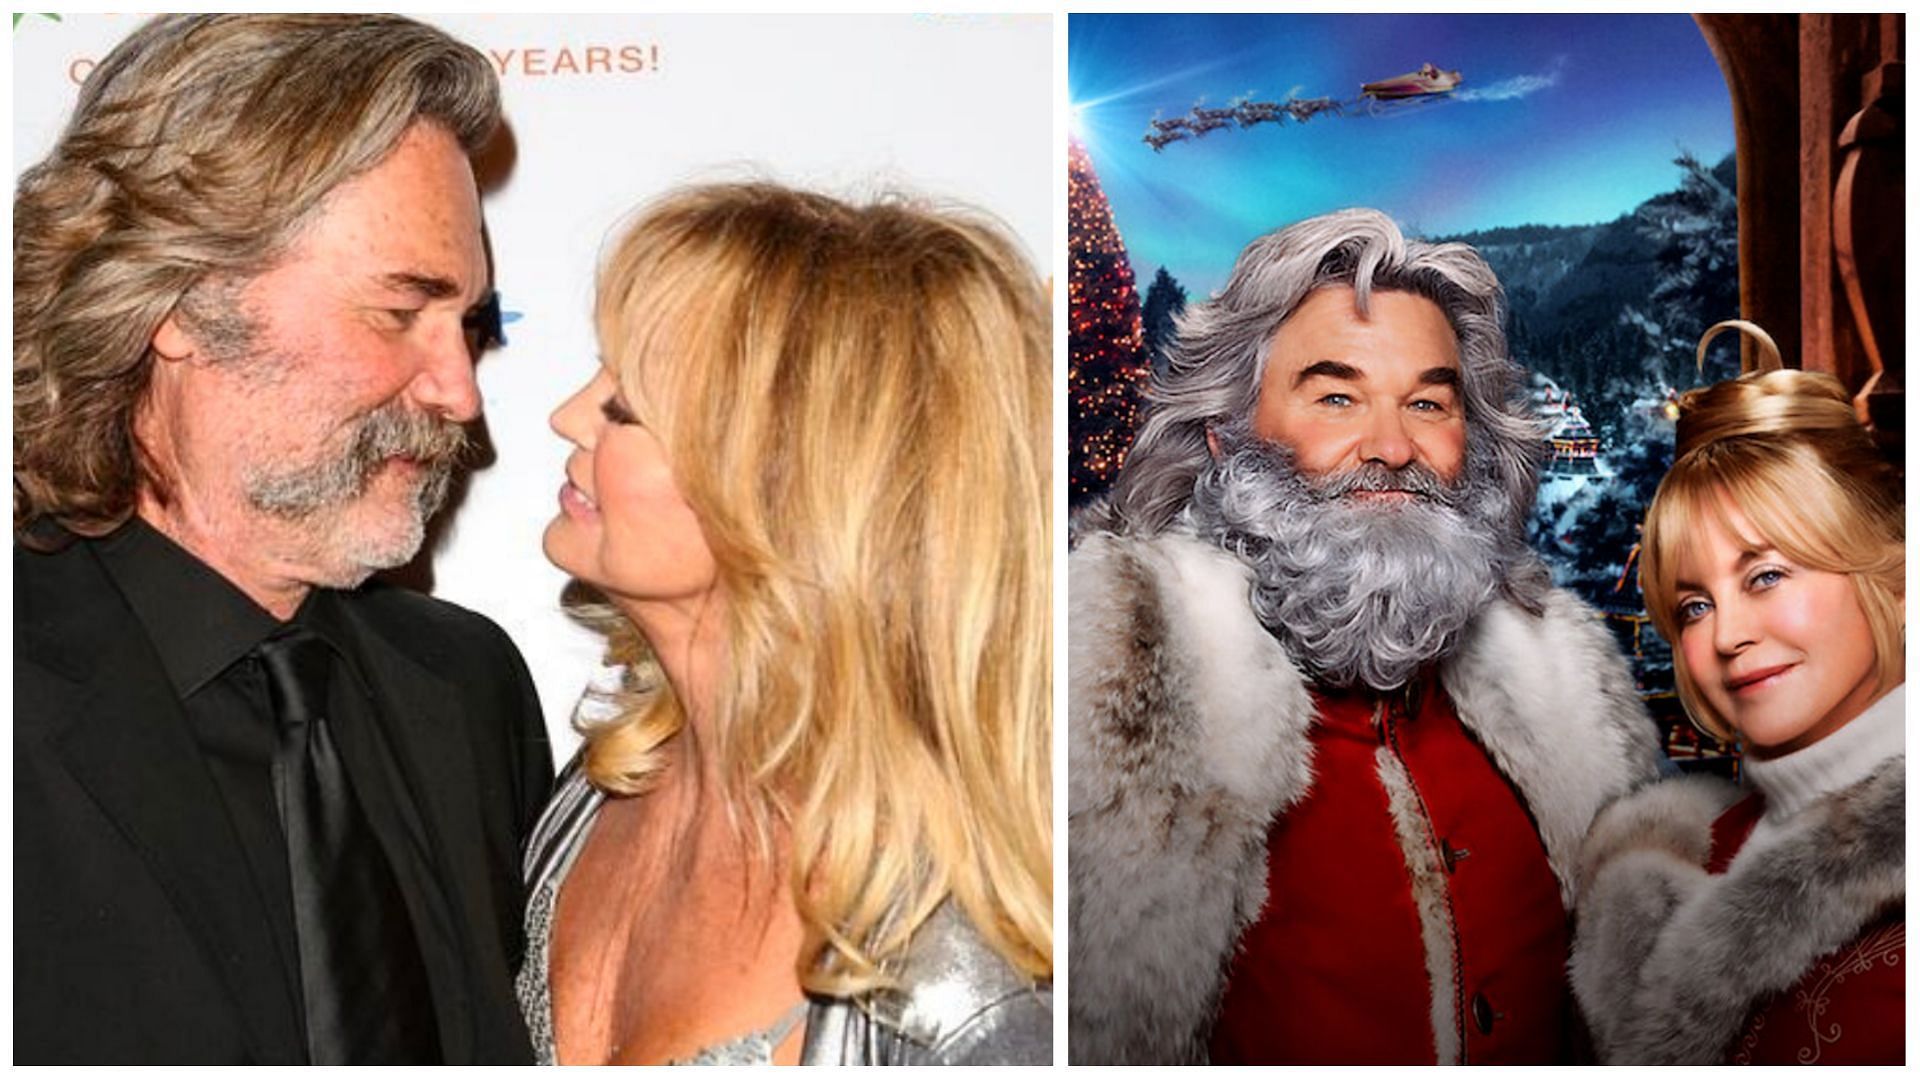 Goldie Hawn has been in a relationship with Kurt Russell since 1983 (Images via Instagram/goldiehawn and Netfilix)